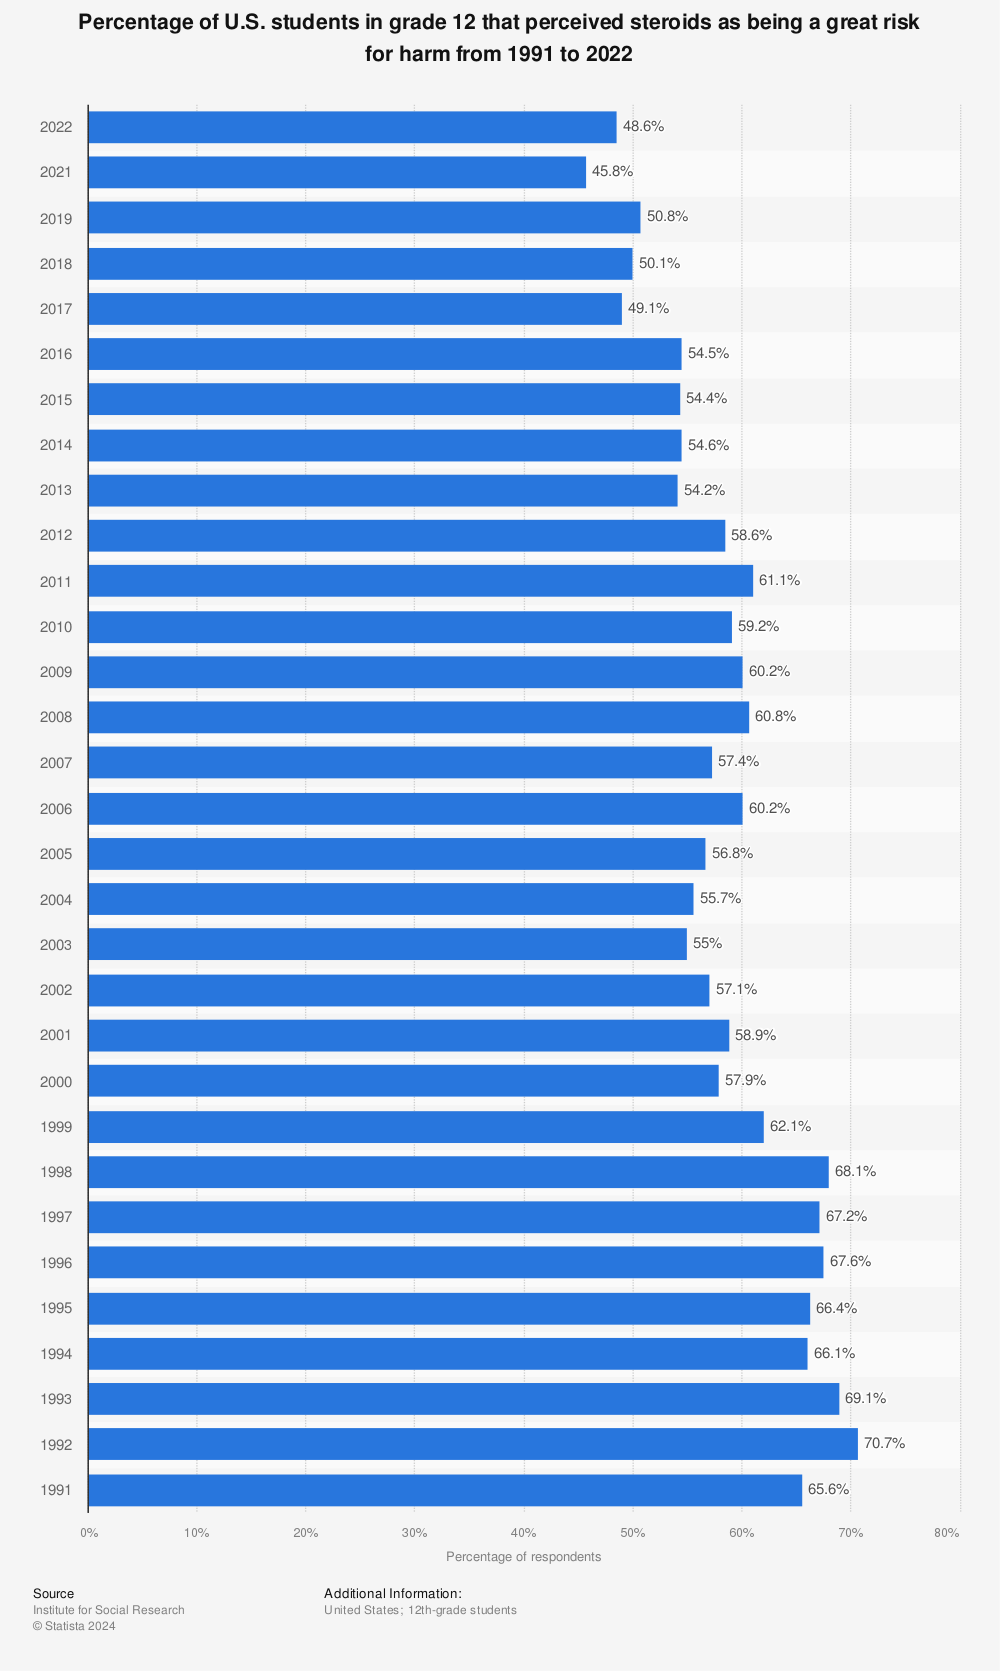 Statistic: Percentage of U.S. students in grade 12 that perceived steroids as being a great risk for harm from 1991 to 2021 | Statista